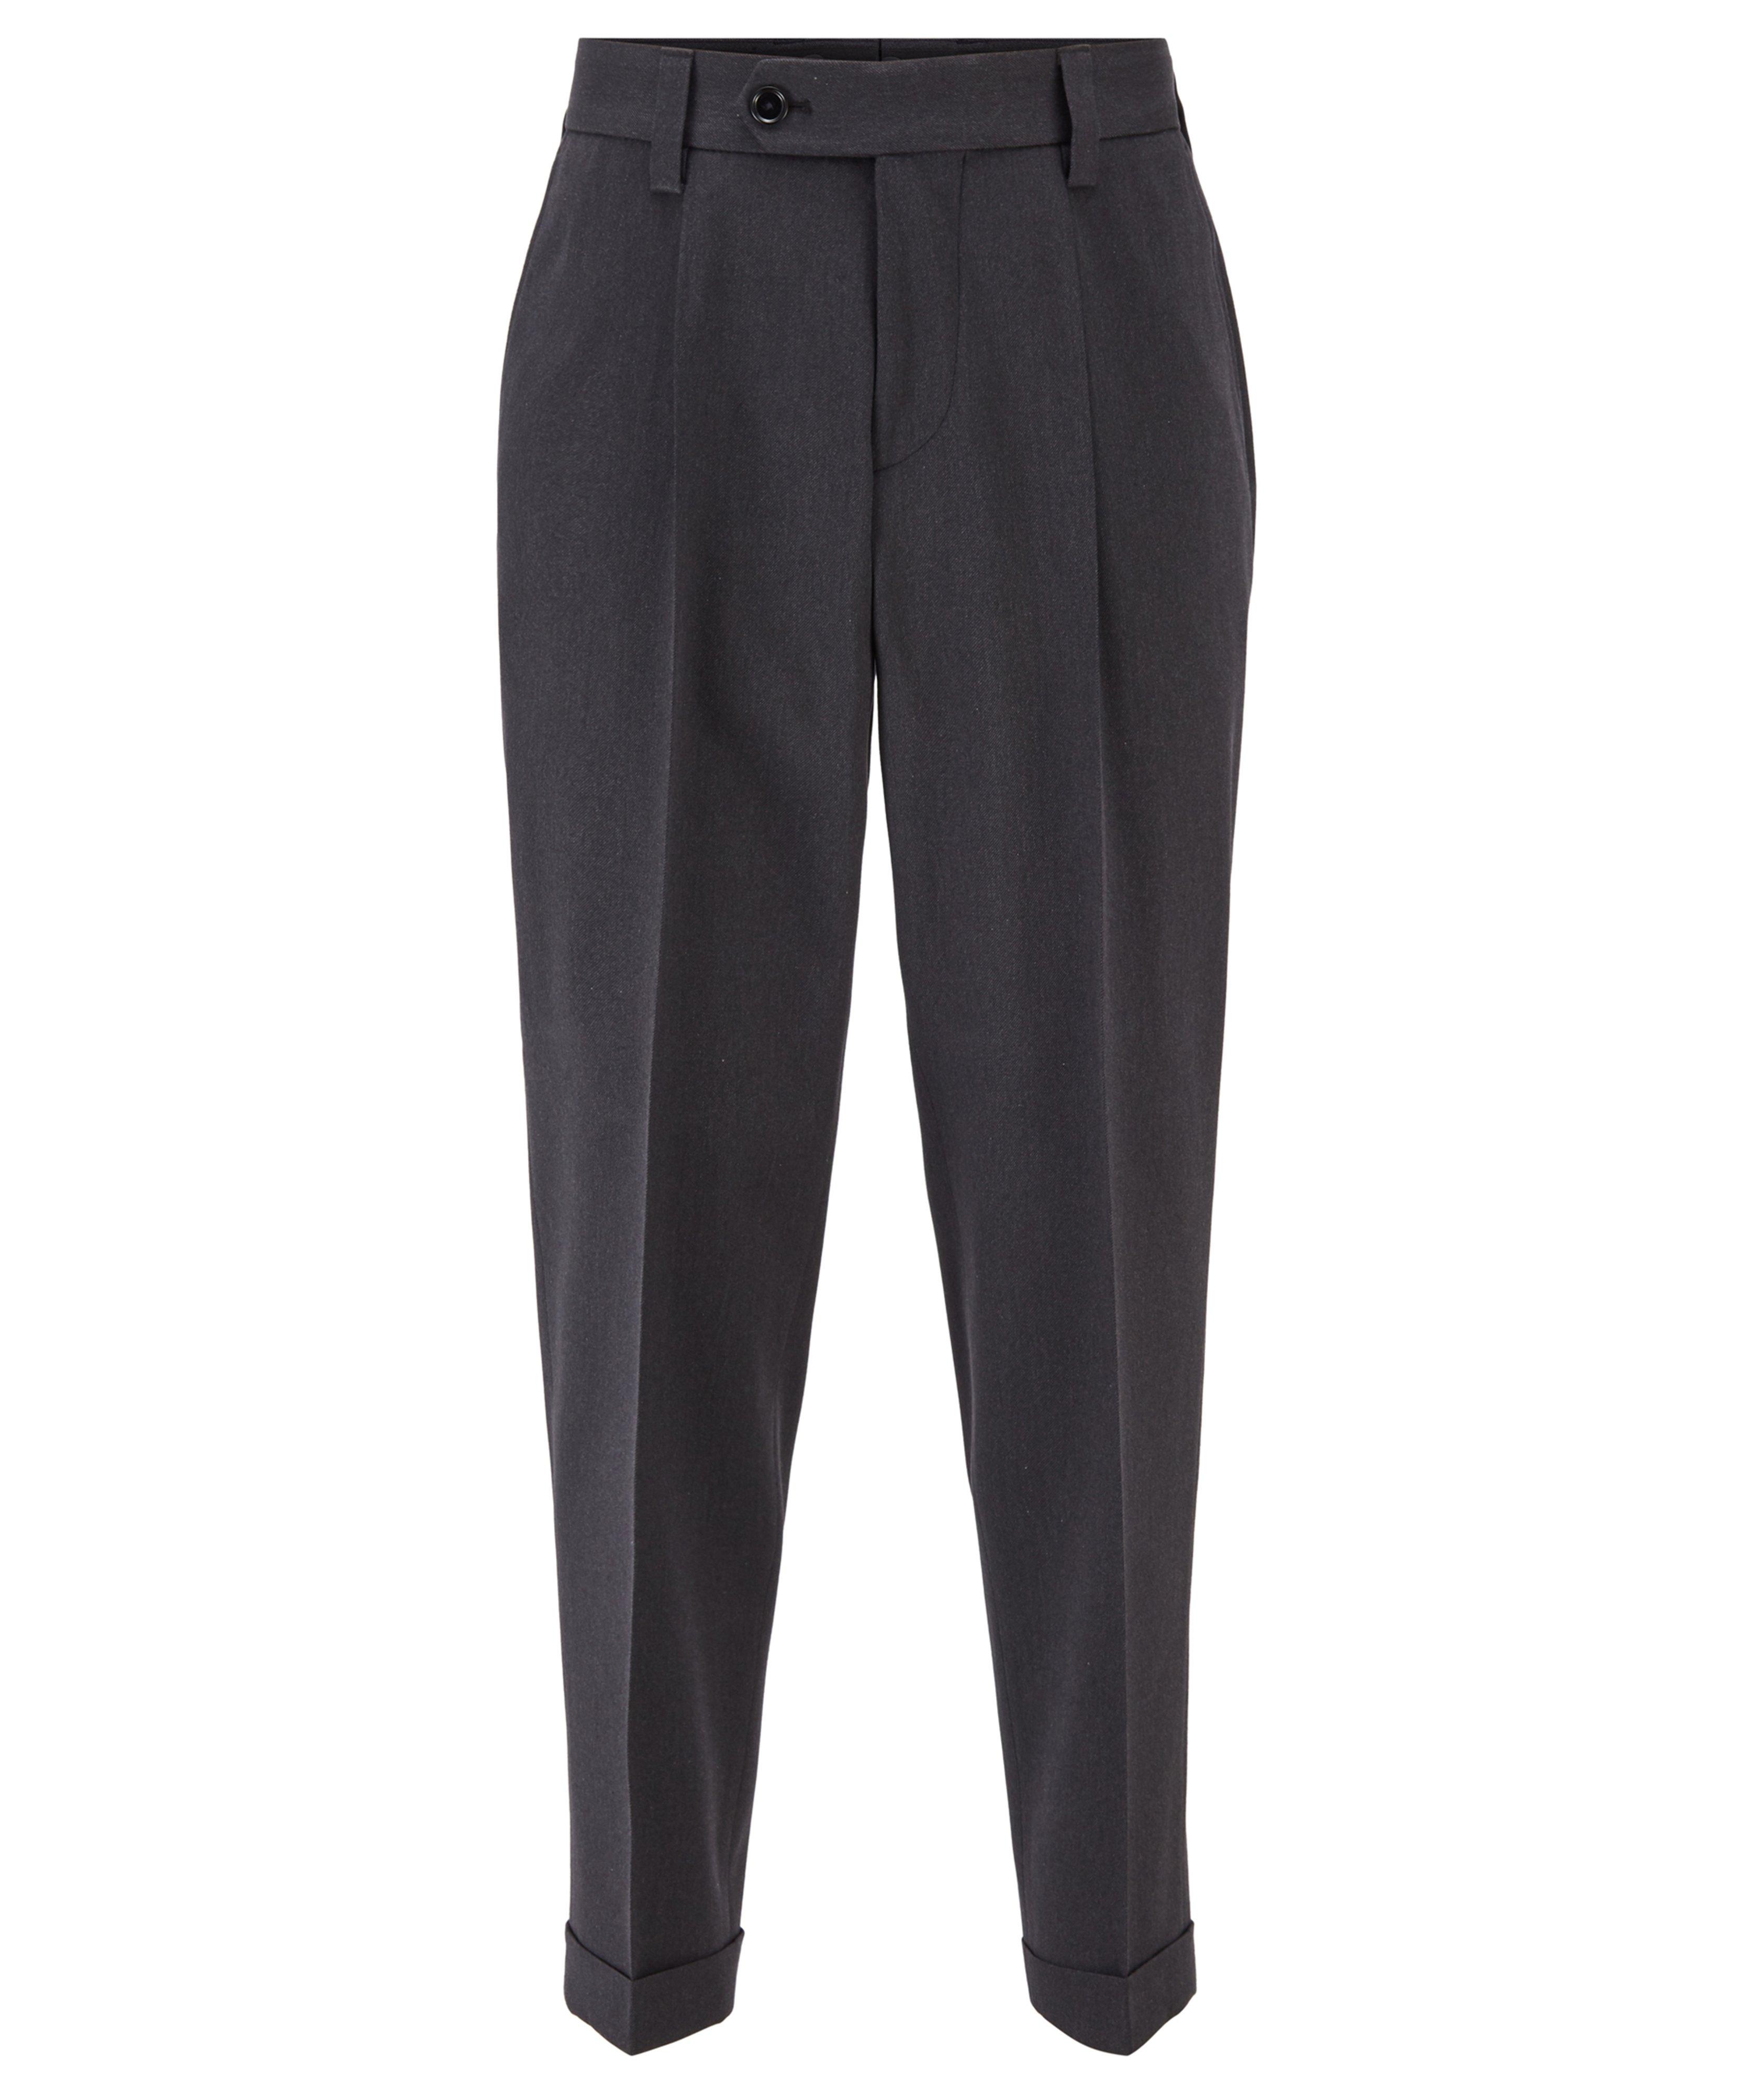 Oversized Cotton-Wool Trousers image 0